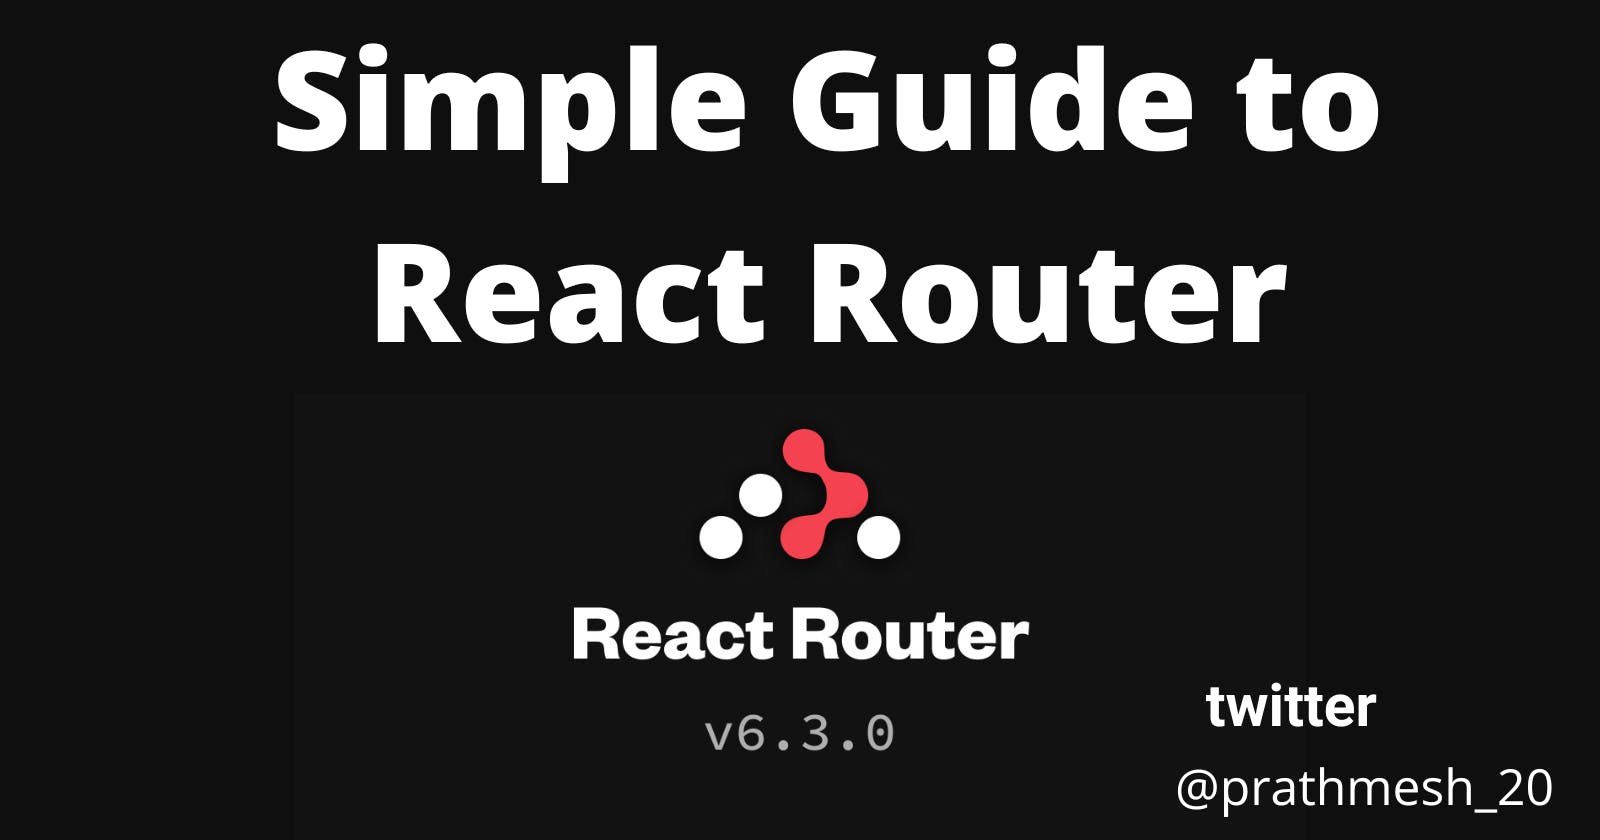 Simple Guide to React Router